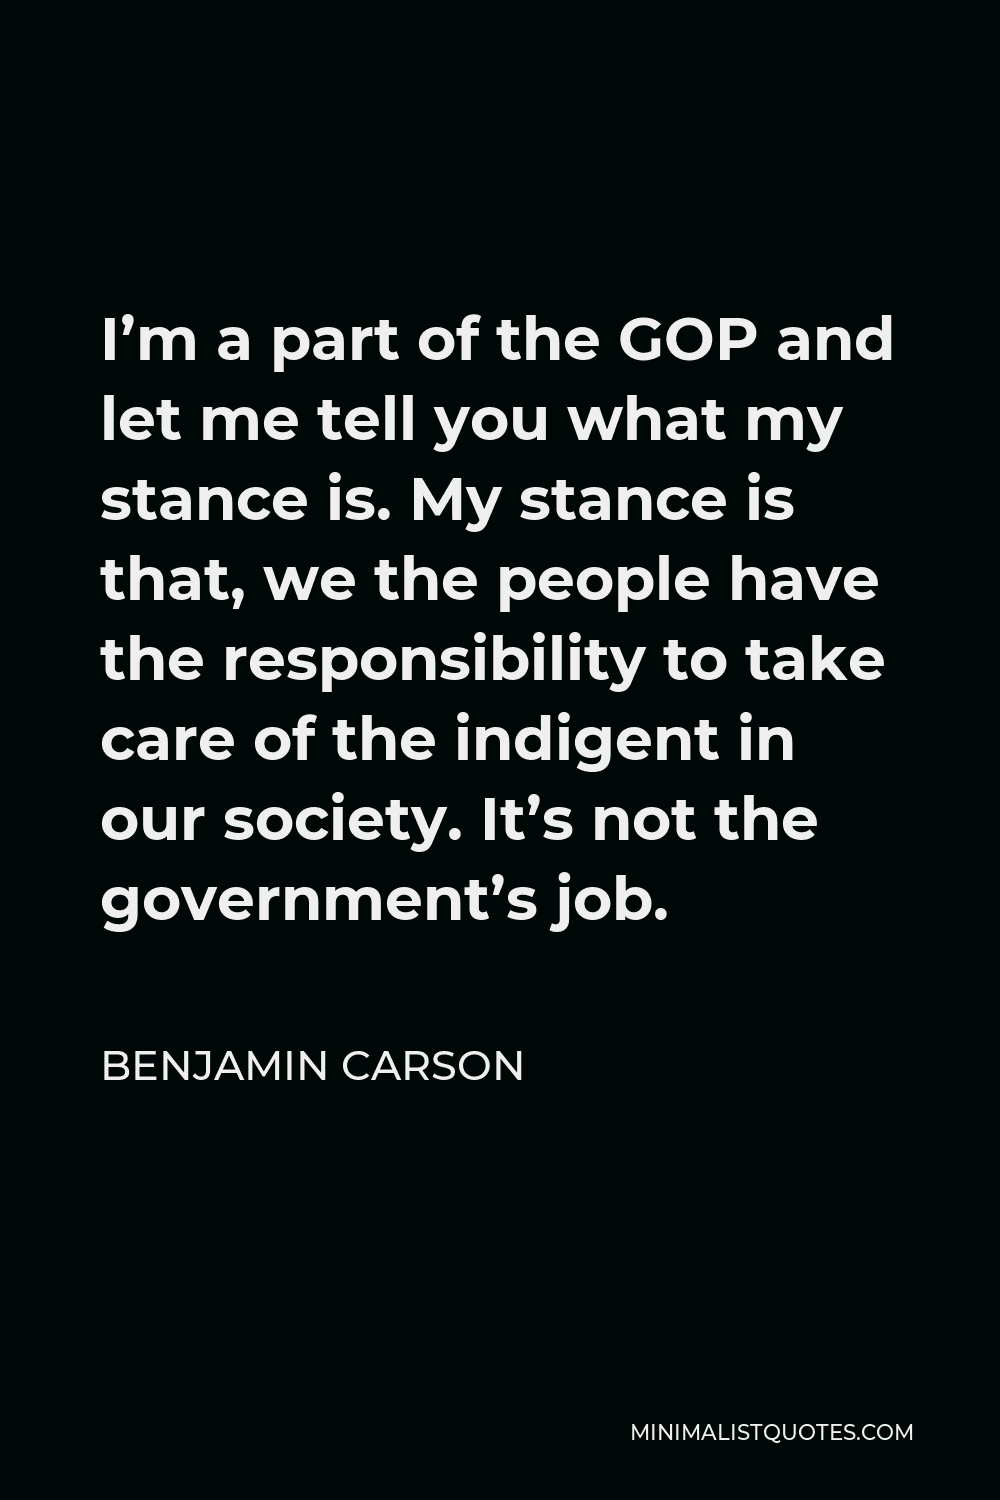 Benjamin Carson Quote - I’m a part of the GOP and let me tell you what my stance is. My stance is that, we the people have the responsibility to take care of the indigent in our society. It’s not the government’s job.